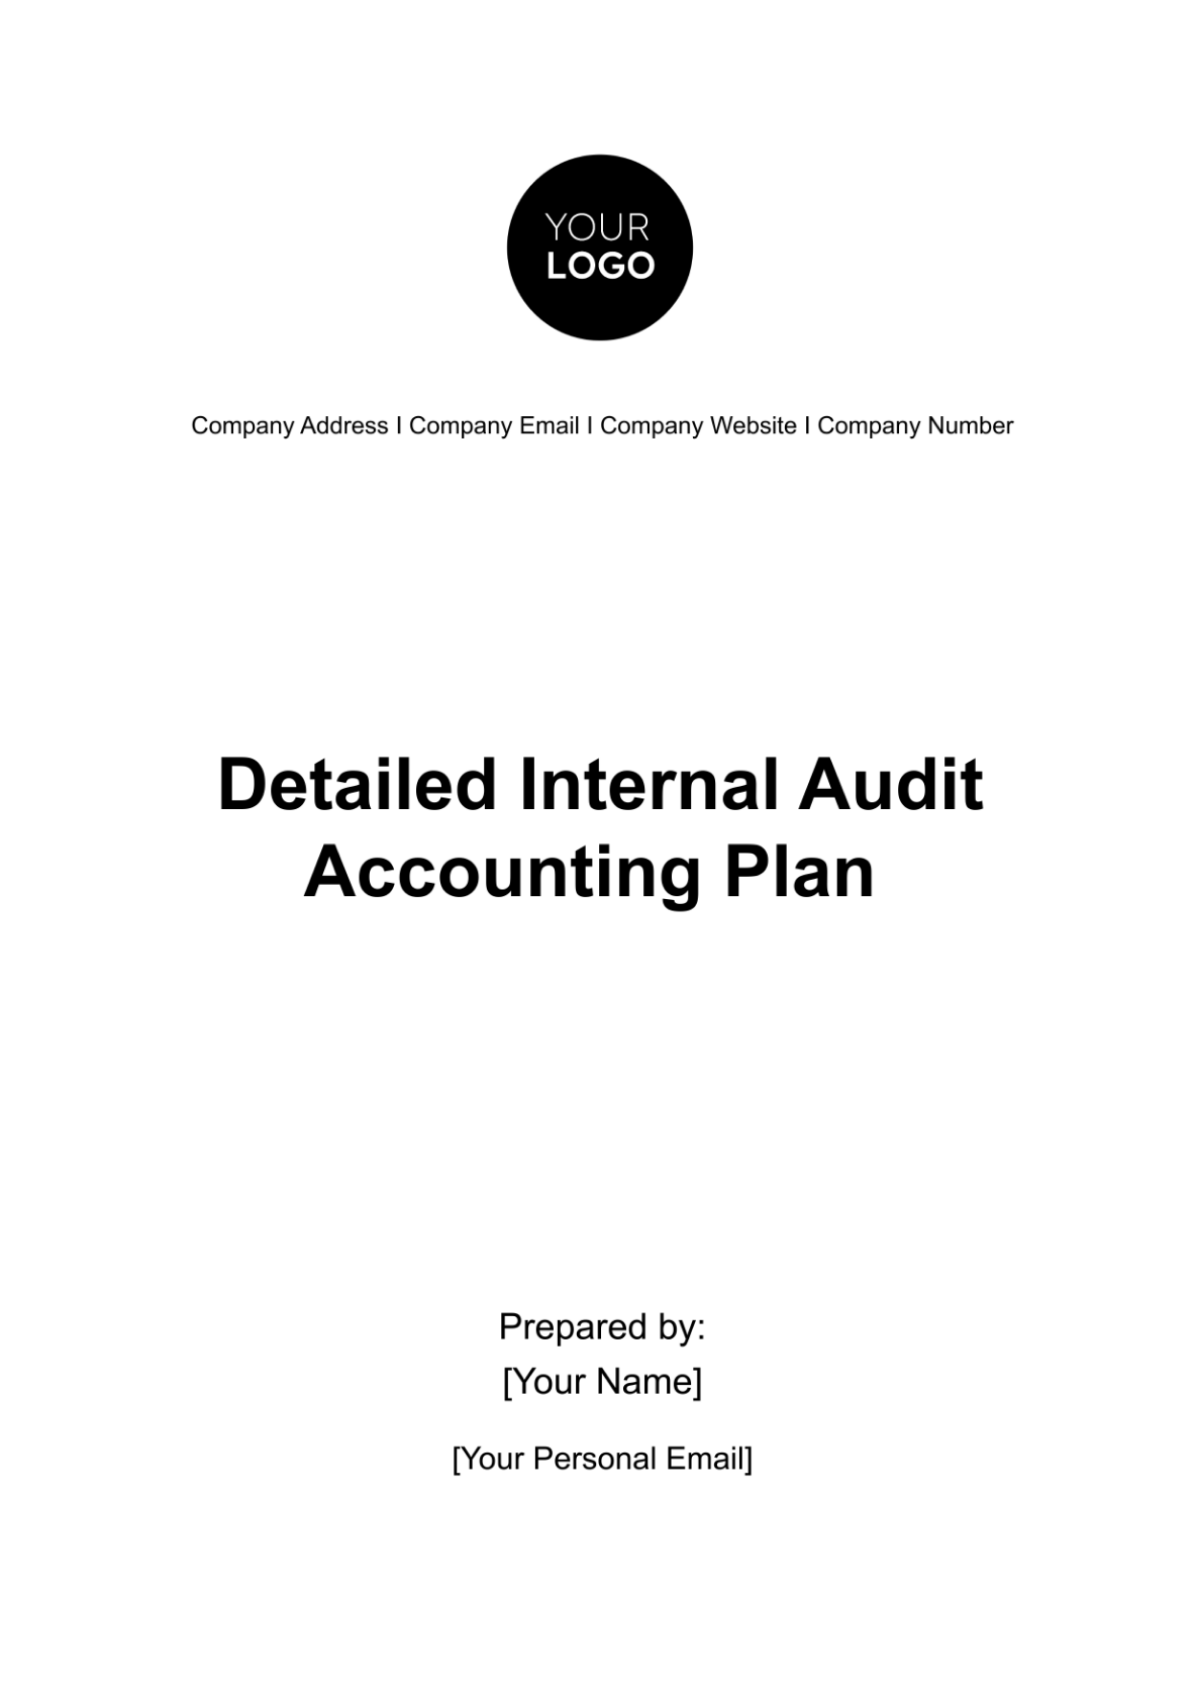 Detailed Internal Audit Accounting Plan Template